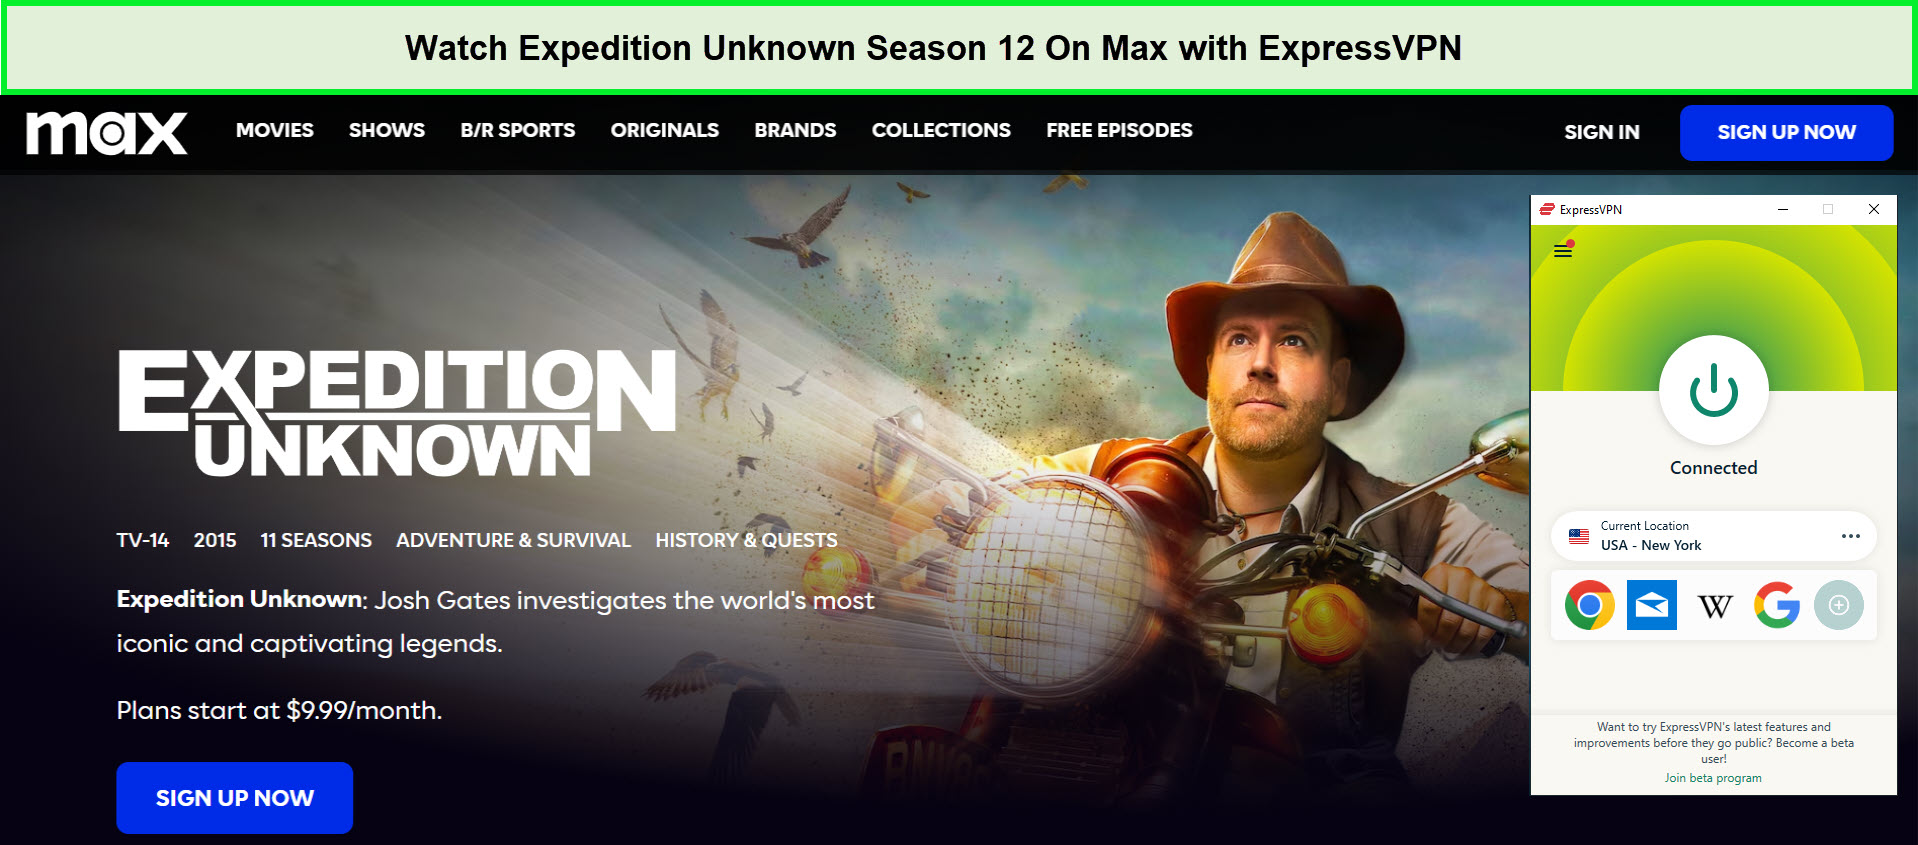 Watch-Expedition-Unknown-Season-12-in-Netherlands-On-Max-with-ExpressVPN